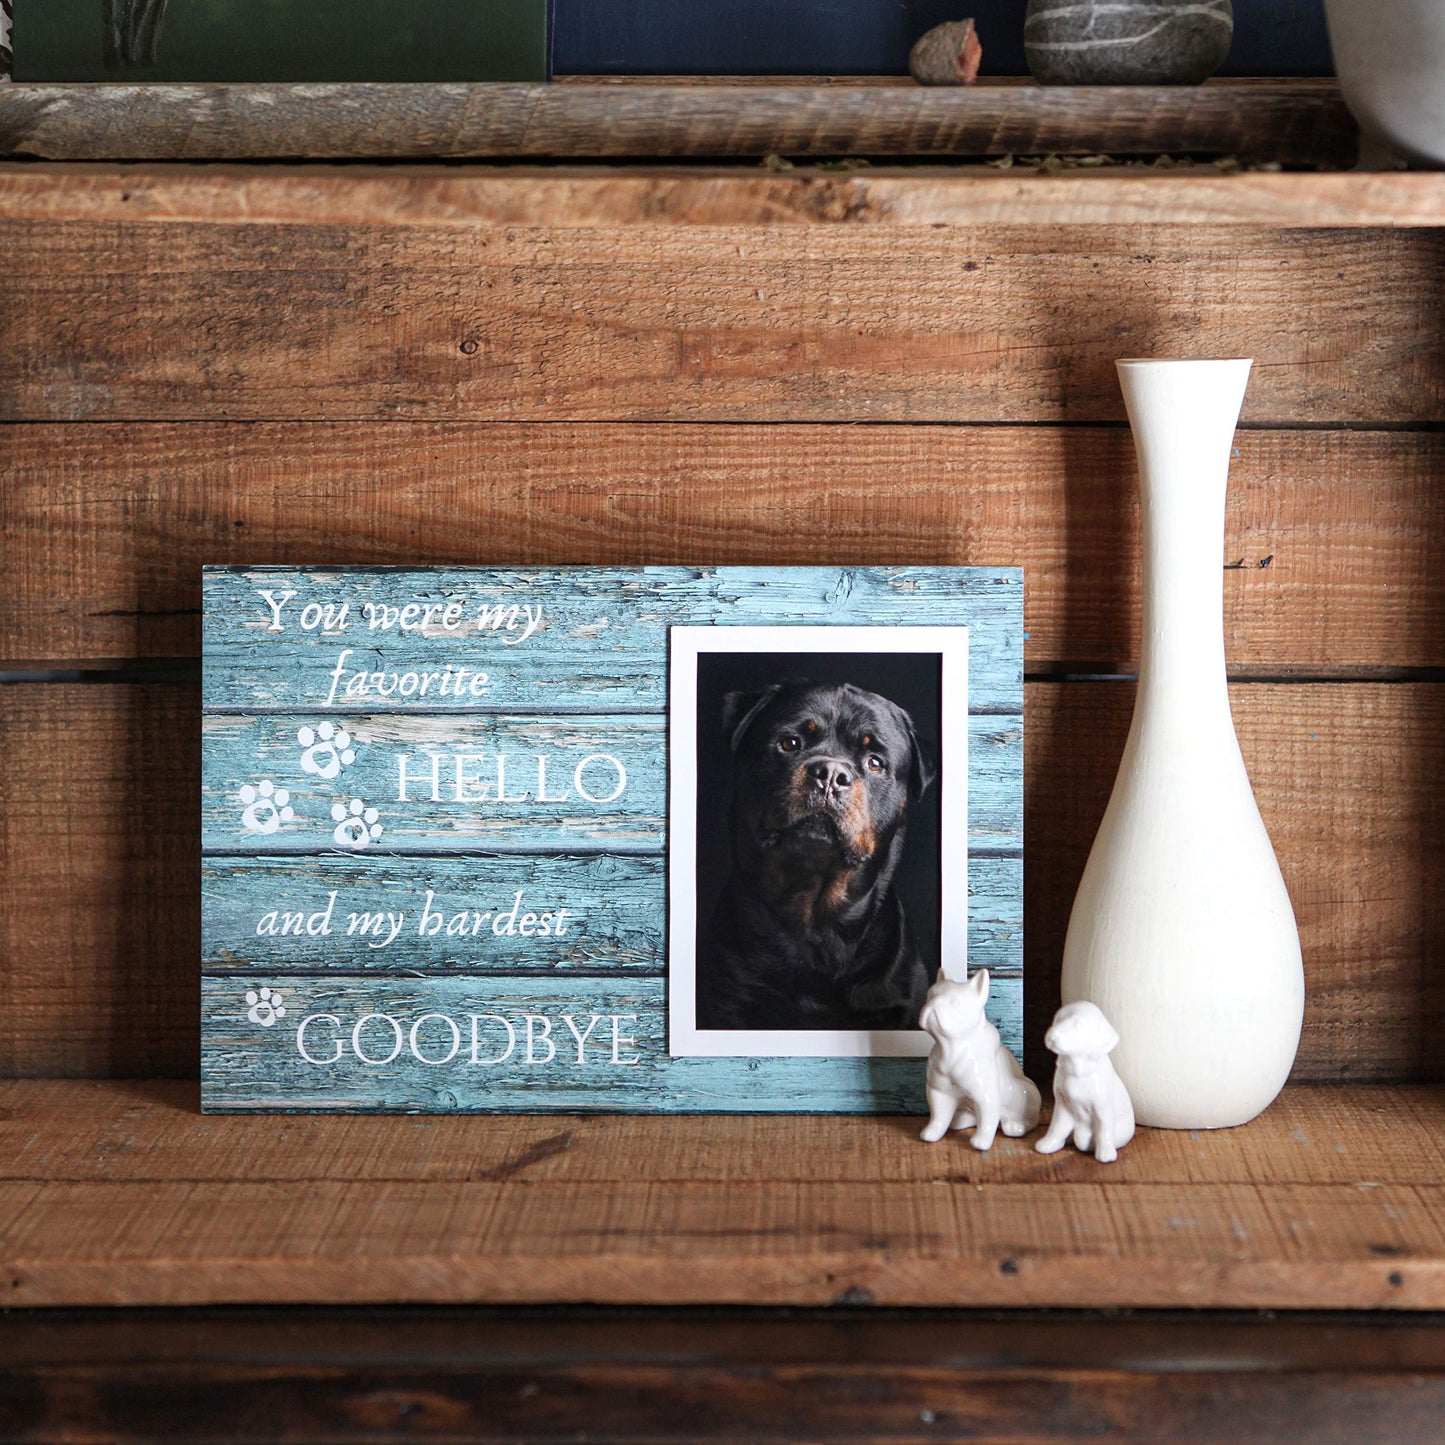 DOG MEMORIAL GIFTS - You Were My Favorite Hello And My Hardest Goodbye Pet Memorial Picture Frame With 4x6 Photo In An 8"x12" Plaque - Sympathy For Loss Of Dog - Dog Remembrance Gift - Pet Loss Gifts